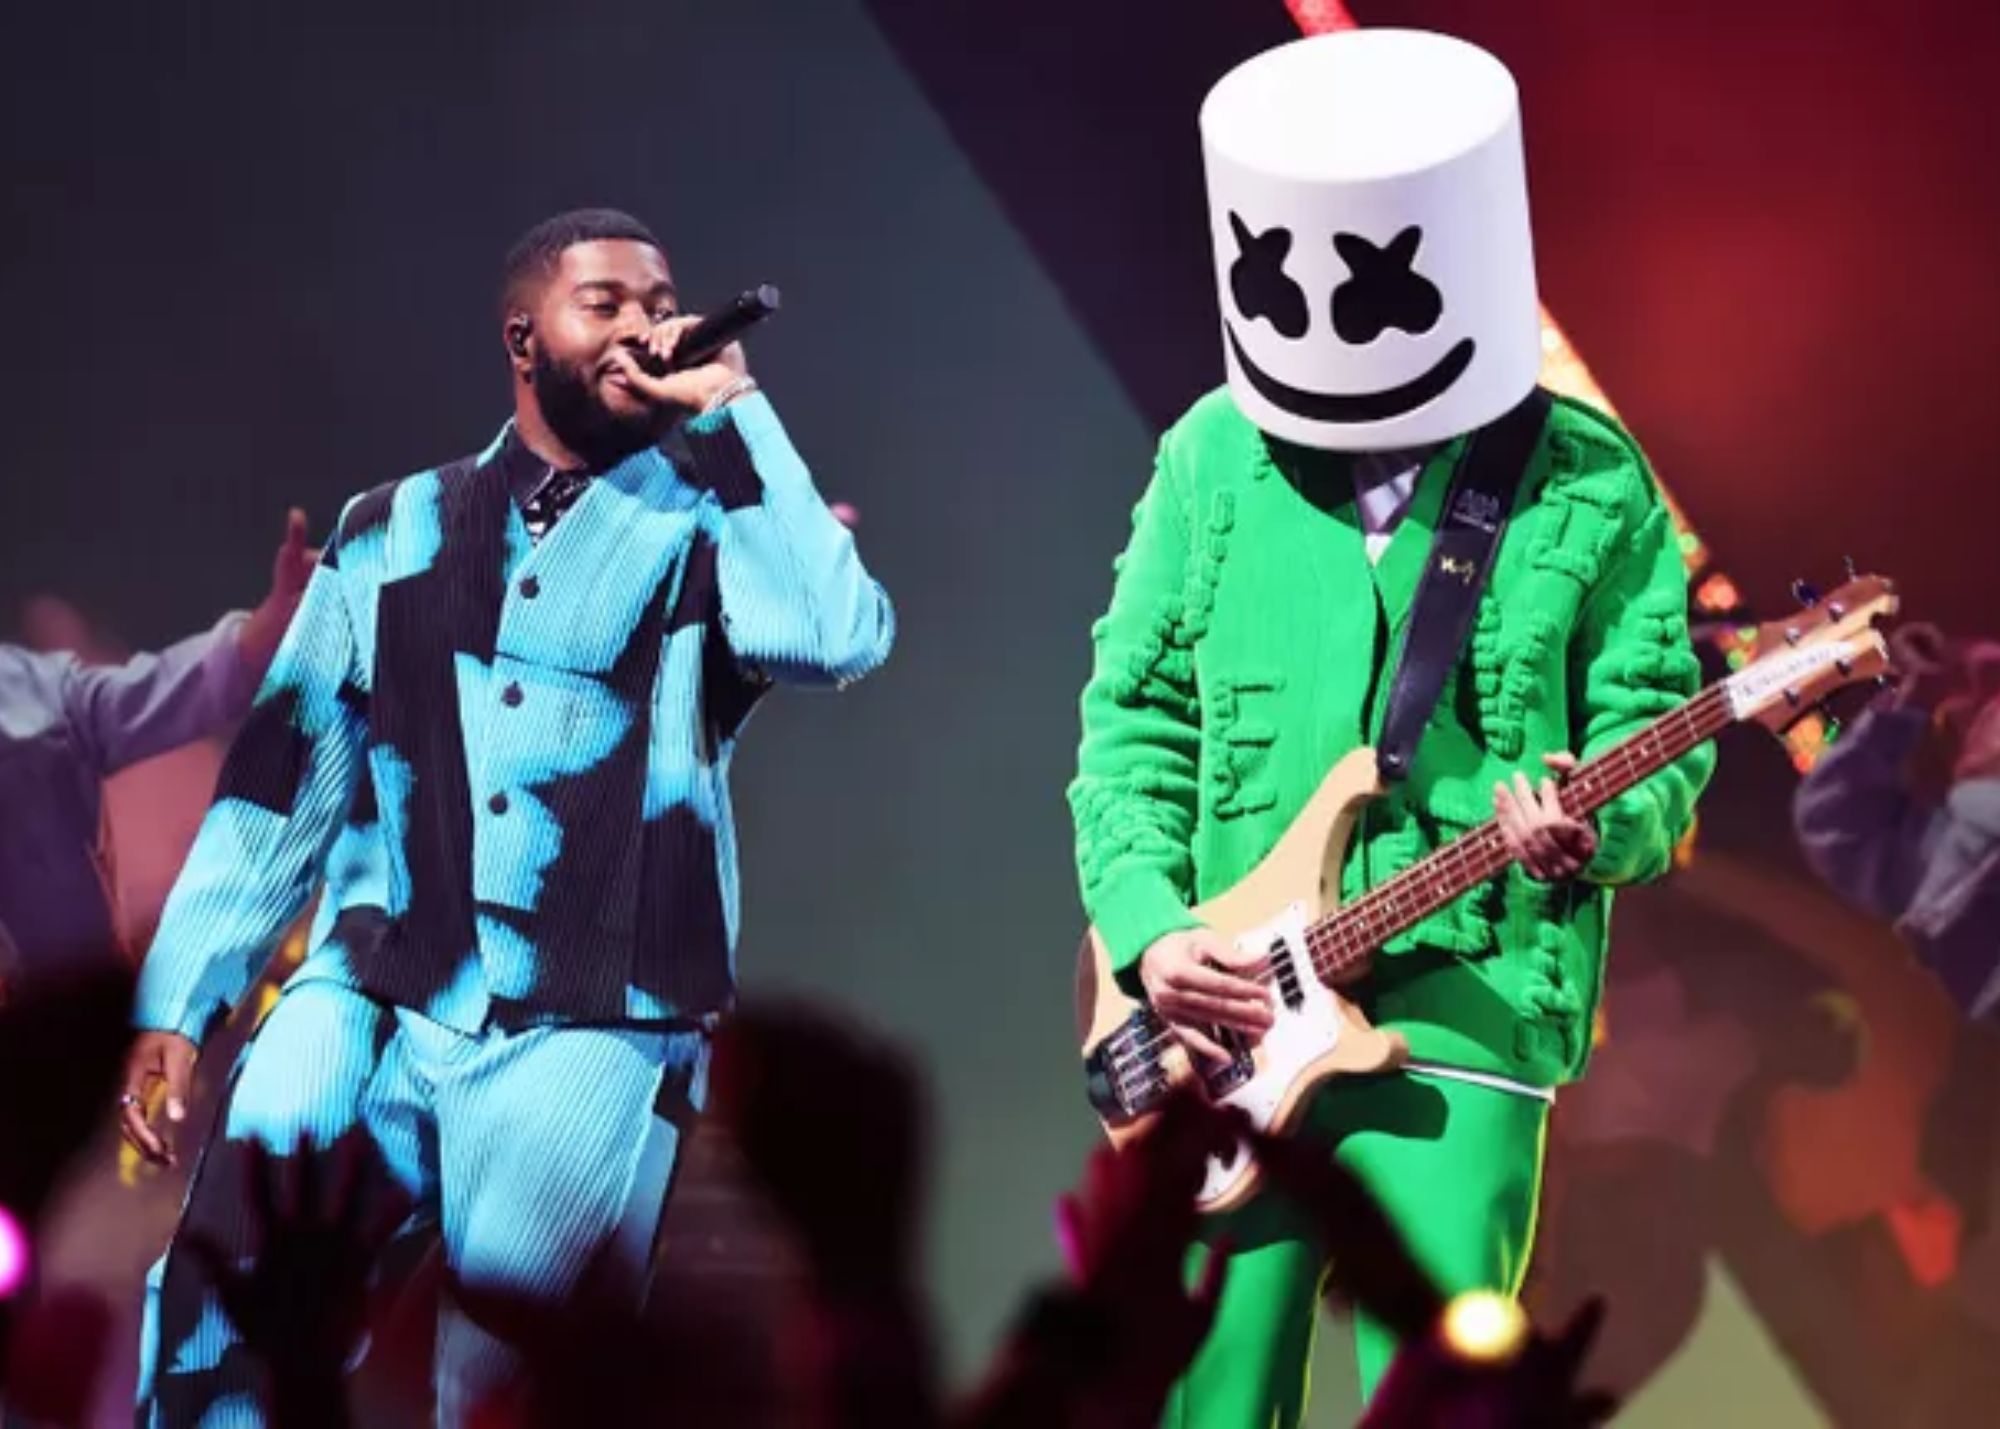 Marshmello is attired in a green outfit with an electric guitar, while Khalid is suited up in a sky blue patch outfit